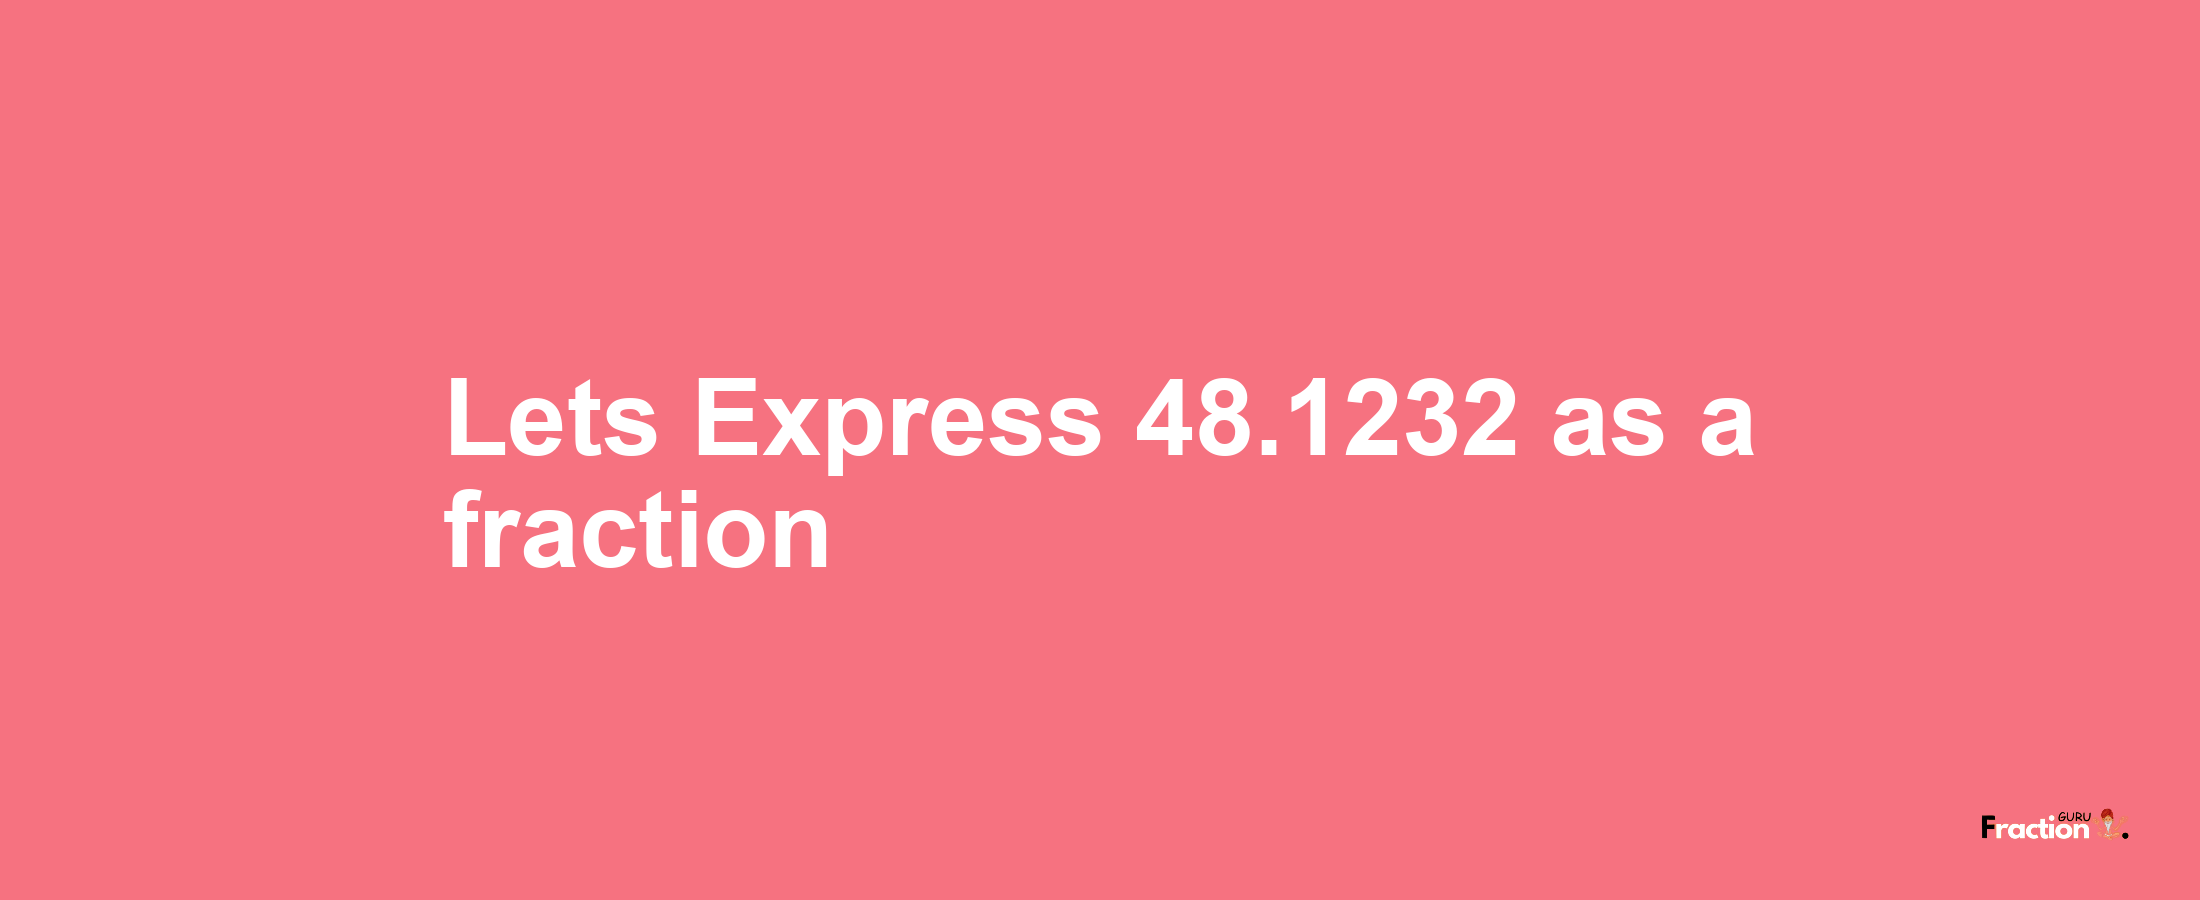 Lets Express 48.1232 as afraction